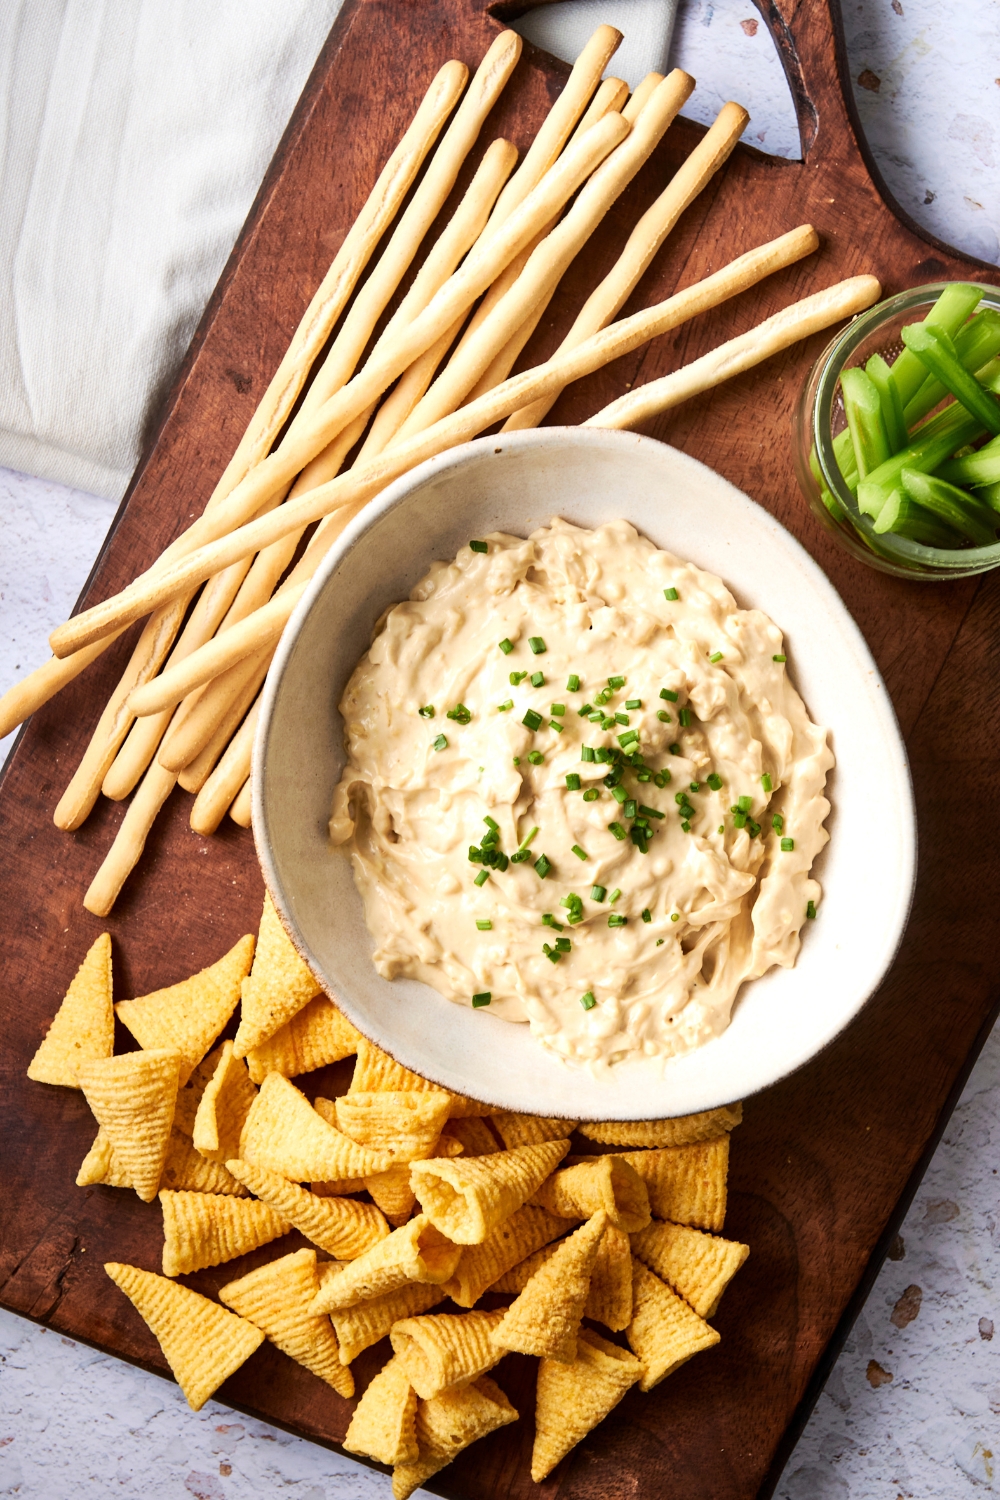 A wooden serving board holds a large white bowl of Lipton french onion dip, crackers, and celery.